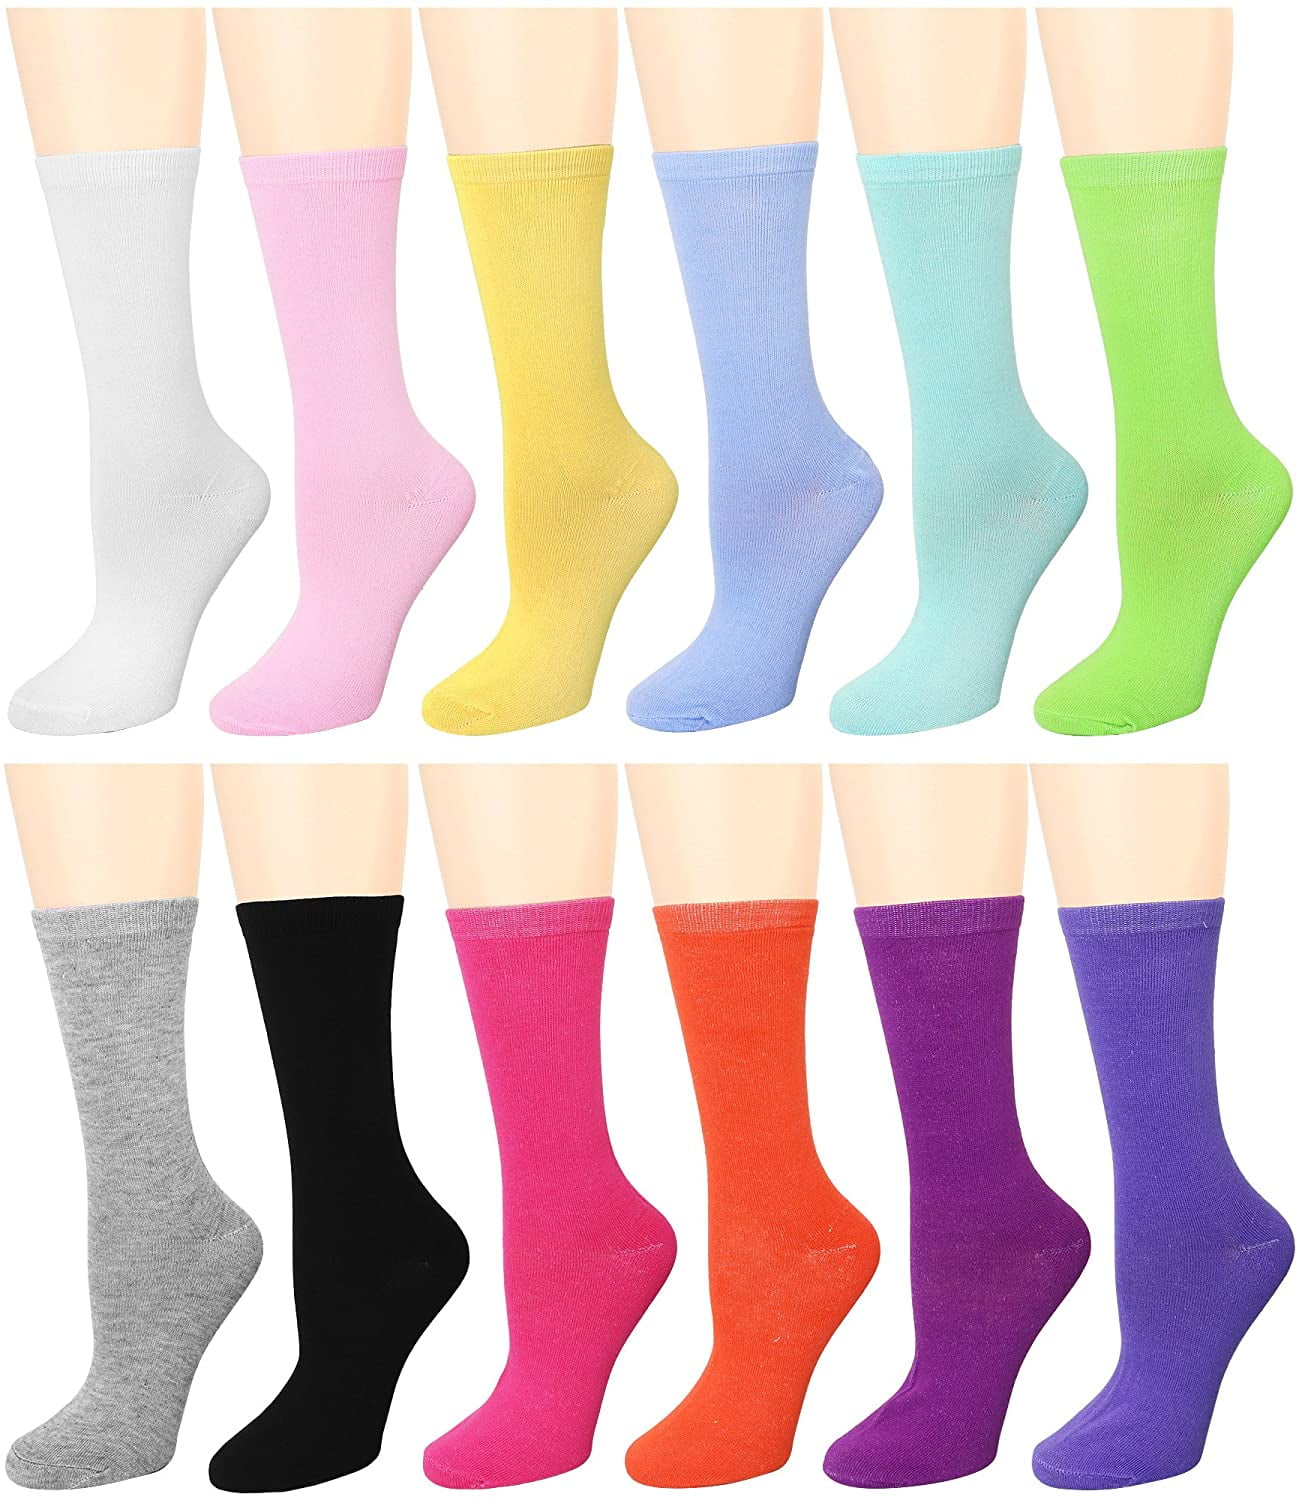 New Lot 12 Pairs Womens Multiple Color Crew Socks Cotton Size 9-11 Fashion